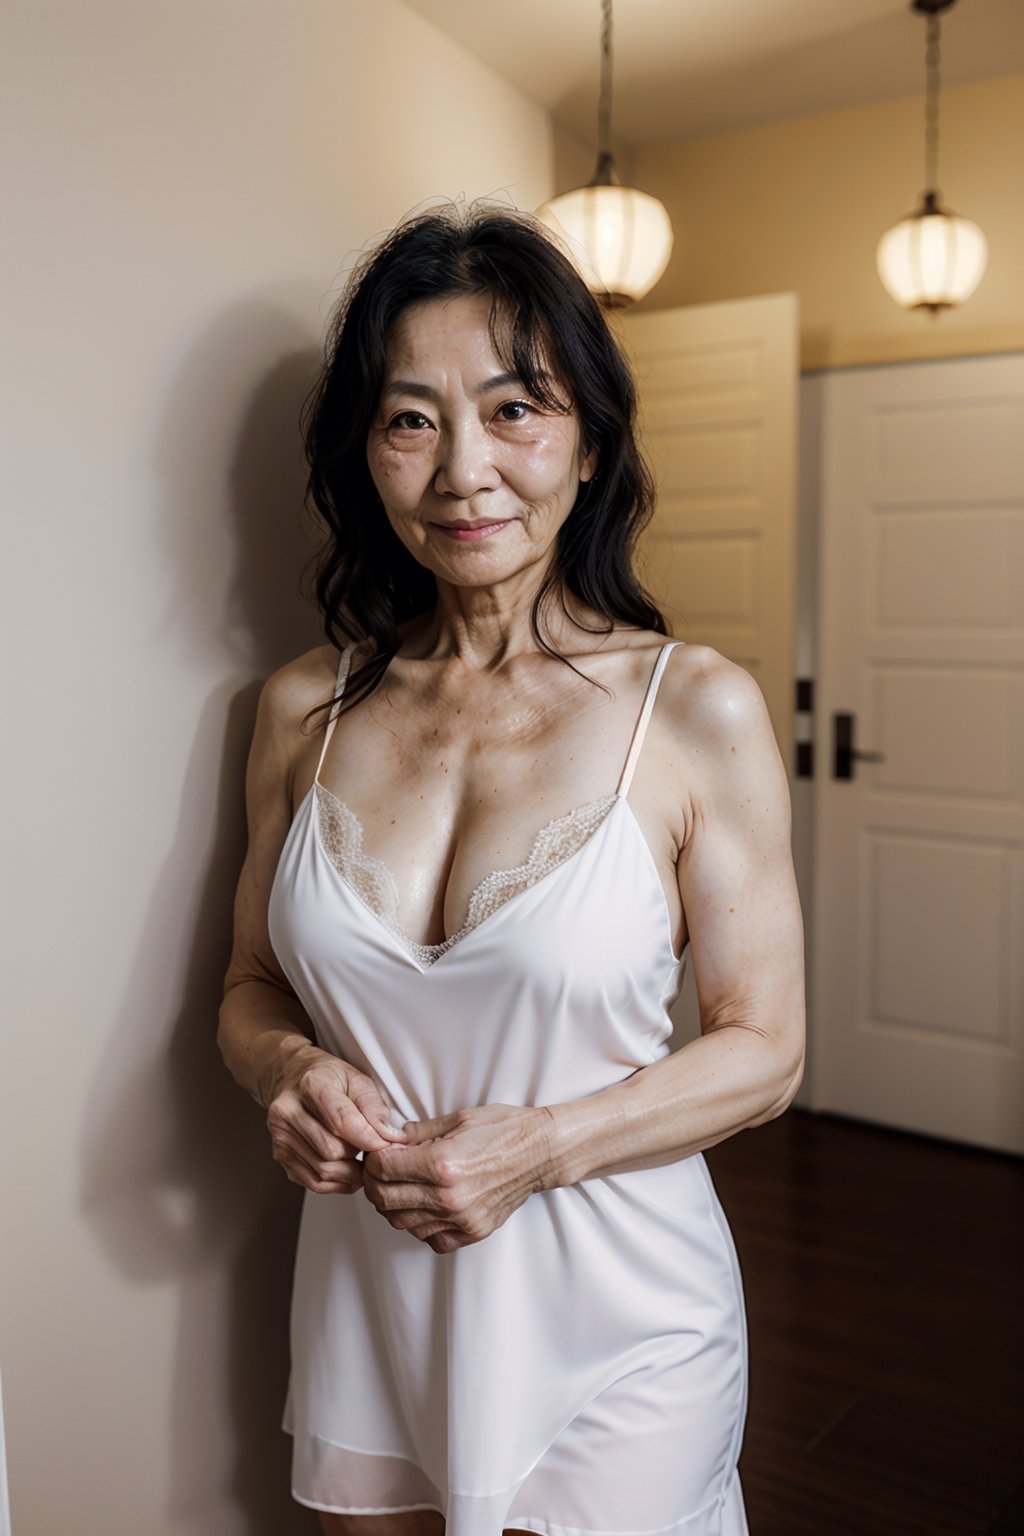 X 上的KEMO-Cyberfashion：「PIC of the day #mature with saggy